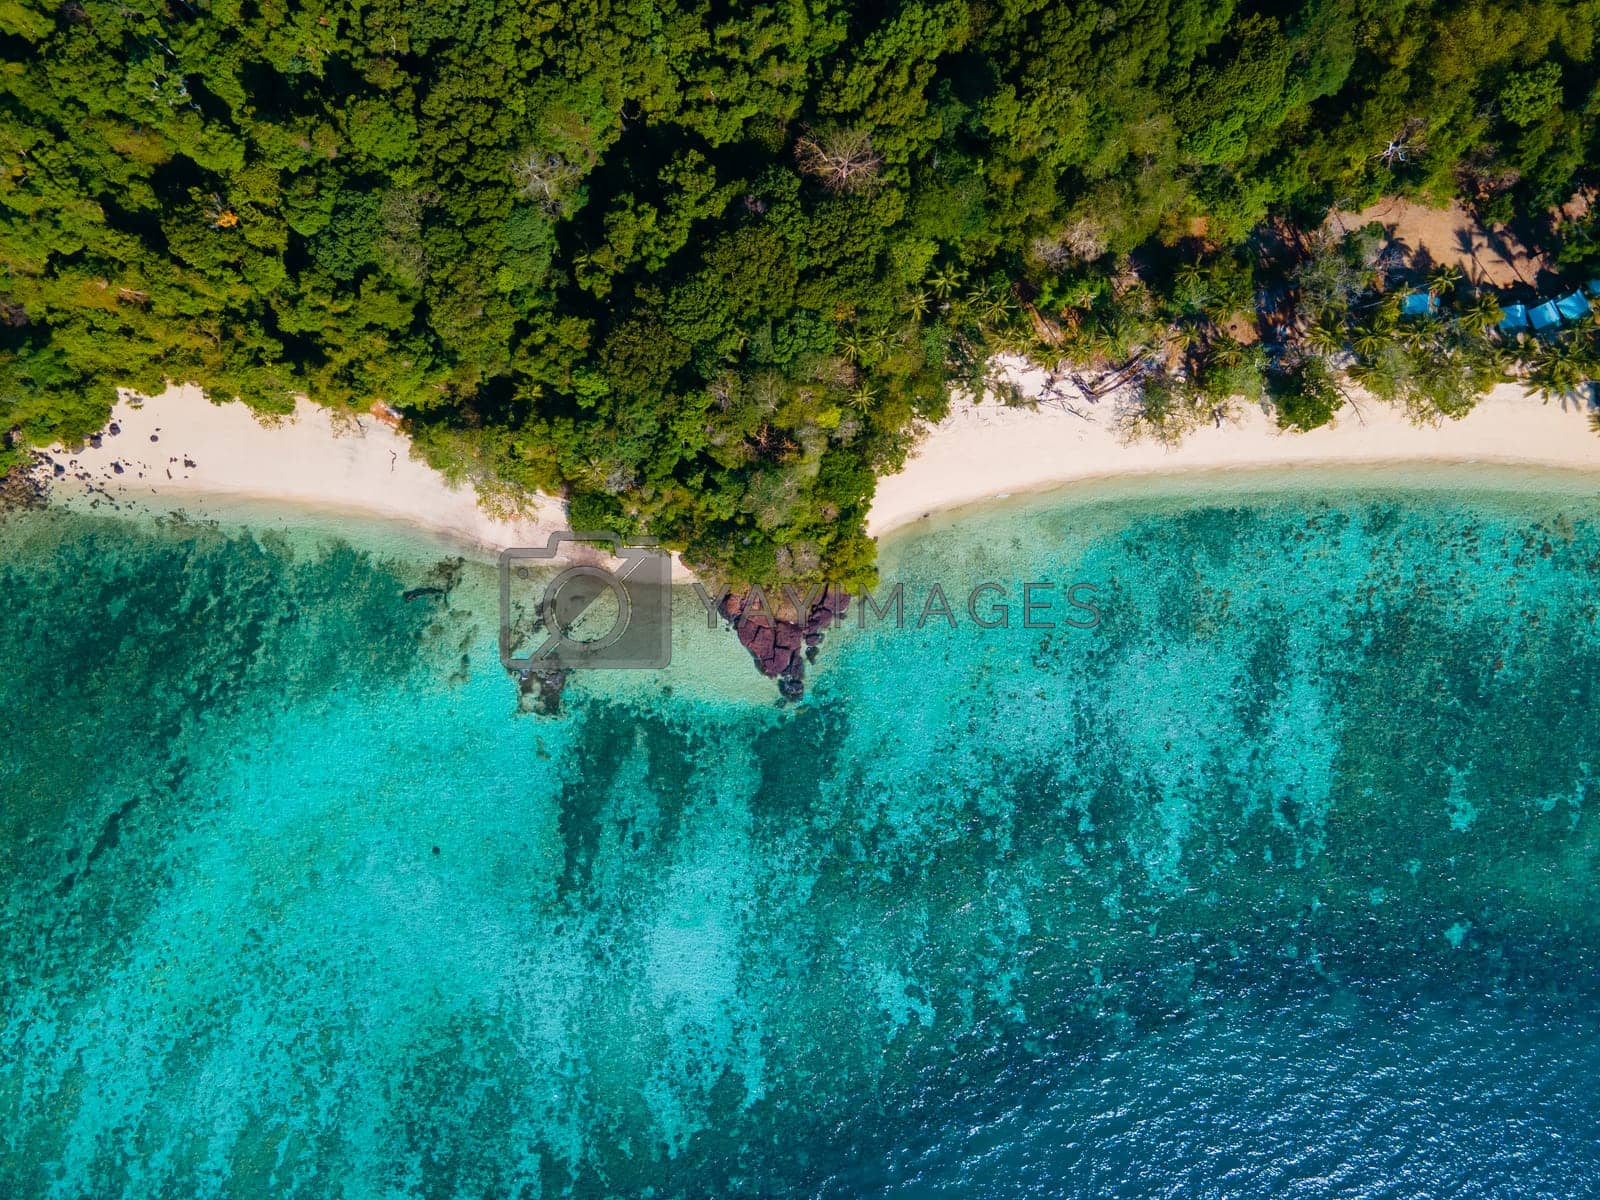 Royalty free image of drone view at the beach of Koh Kradan island in Thailand by fokkebok